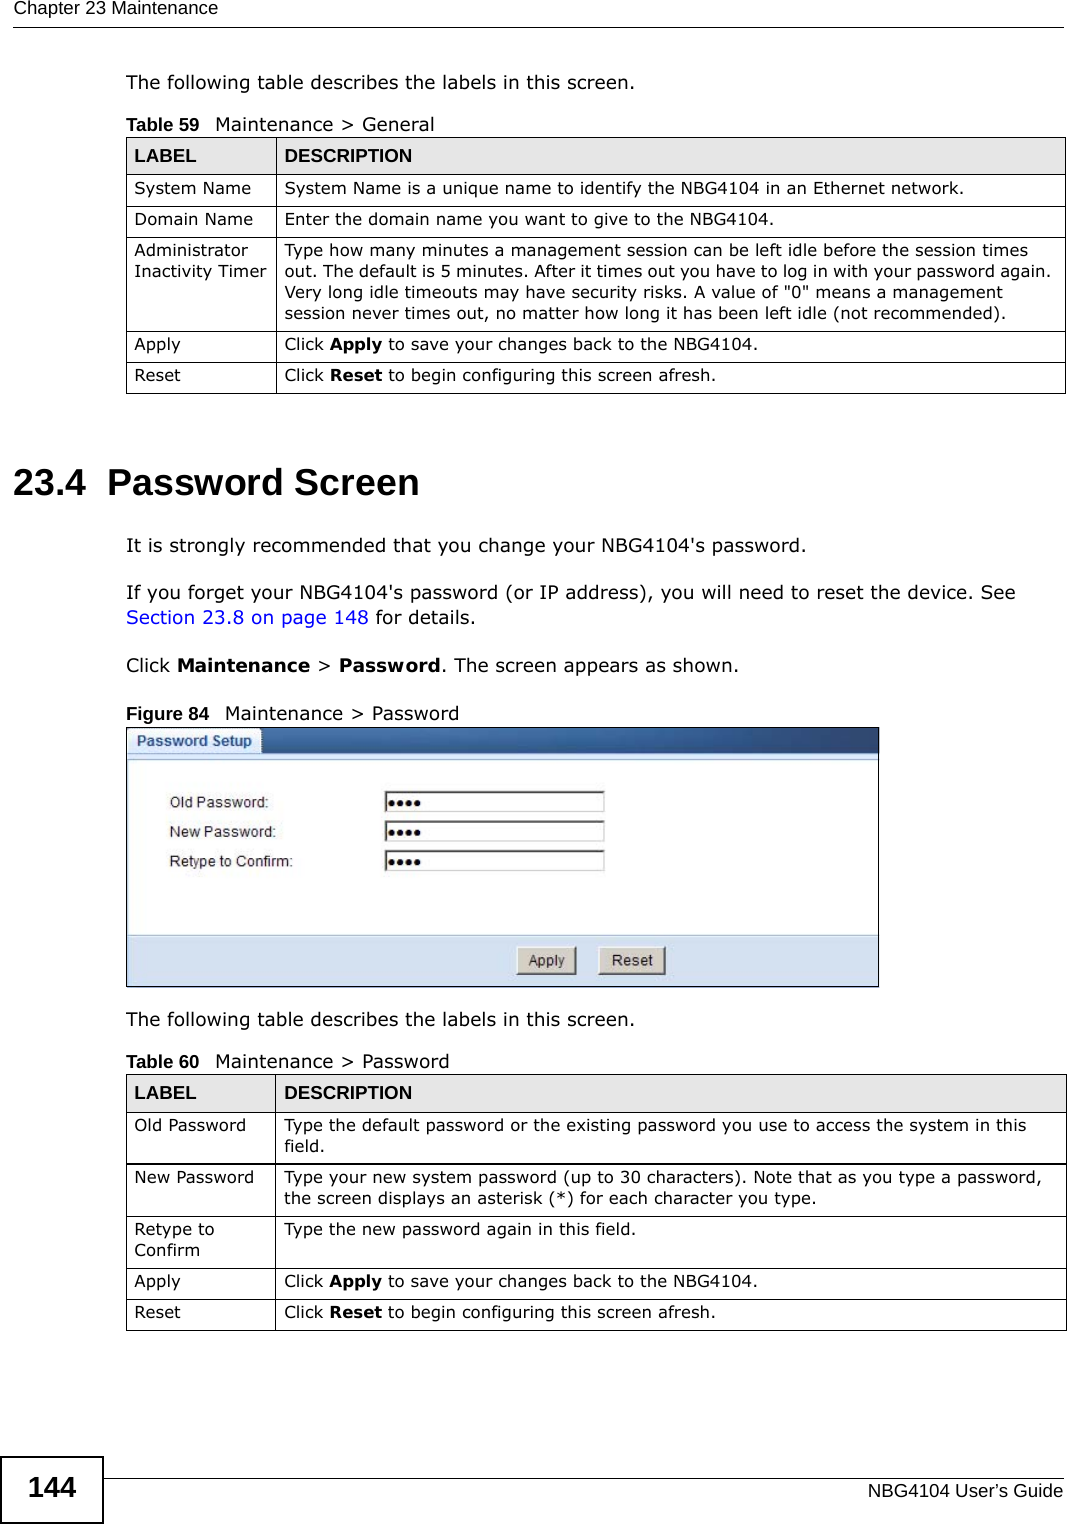 Chapter 23 MaintenanceNBG4104 User’s Guide144The following table describes the labels in this screen.23.4  Password ScreenIt is strongly recommended that you change your NBG4104&apos;s password. If you forget your NBG4104&apos;s password (or IP address), you will need to reset the device. See Section 23.8 on page 148 for details.Click Maintenance &gt; Password. The screen appears as shown.Figure 84   Maintenance &gt; Password The following table describes the labels in this screen.Table 59   Maintenance &gt; GeneralLABEL DESCRIPTIONSystem Name System Name is a unique name to identify the NBG4104 in an Ethernet network.Domain Name Enter the domain name you want to give to the NBG4104.Administrator Inactivity TimerType how many minutes a management session can be left idle before the session times out. The default is 5 minutes. After it times out you have to log in with your password again. Very long idle timeouts may have security risks. A value of &quot;0&quot; means a management session never times out, no matter how long it has been left idle (not recommended).Apply Click Apply to save your changes back to the NBG4104.Reset Click Reset to begin configuring this screen afresh.Table 60   Maintenance &gt; PasswordLABEL DESCRIPTIONOld Password Type the default password or the existing password you use to access the system in this field.New Password Type your new system password (up to 30 characters). Note that as you type a password, the screen displays an asterisk (*) for each character you type.Retype to ConfirmType the new password again in this field.Apply Click Apply to save your changes back to the NBG4104.Reset Click Reset to begin configuring this screen afresh.